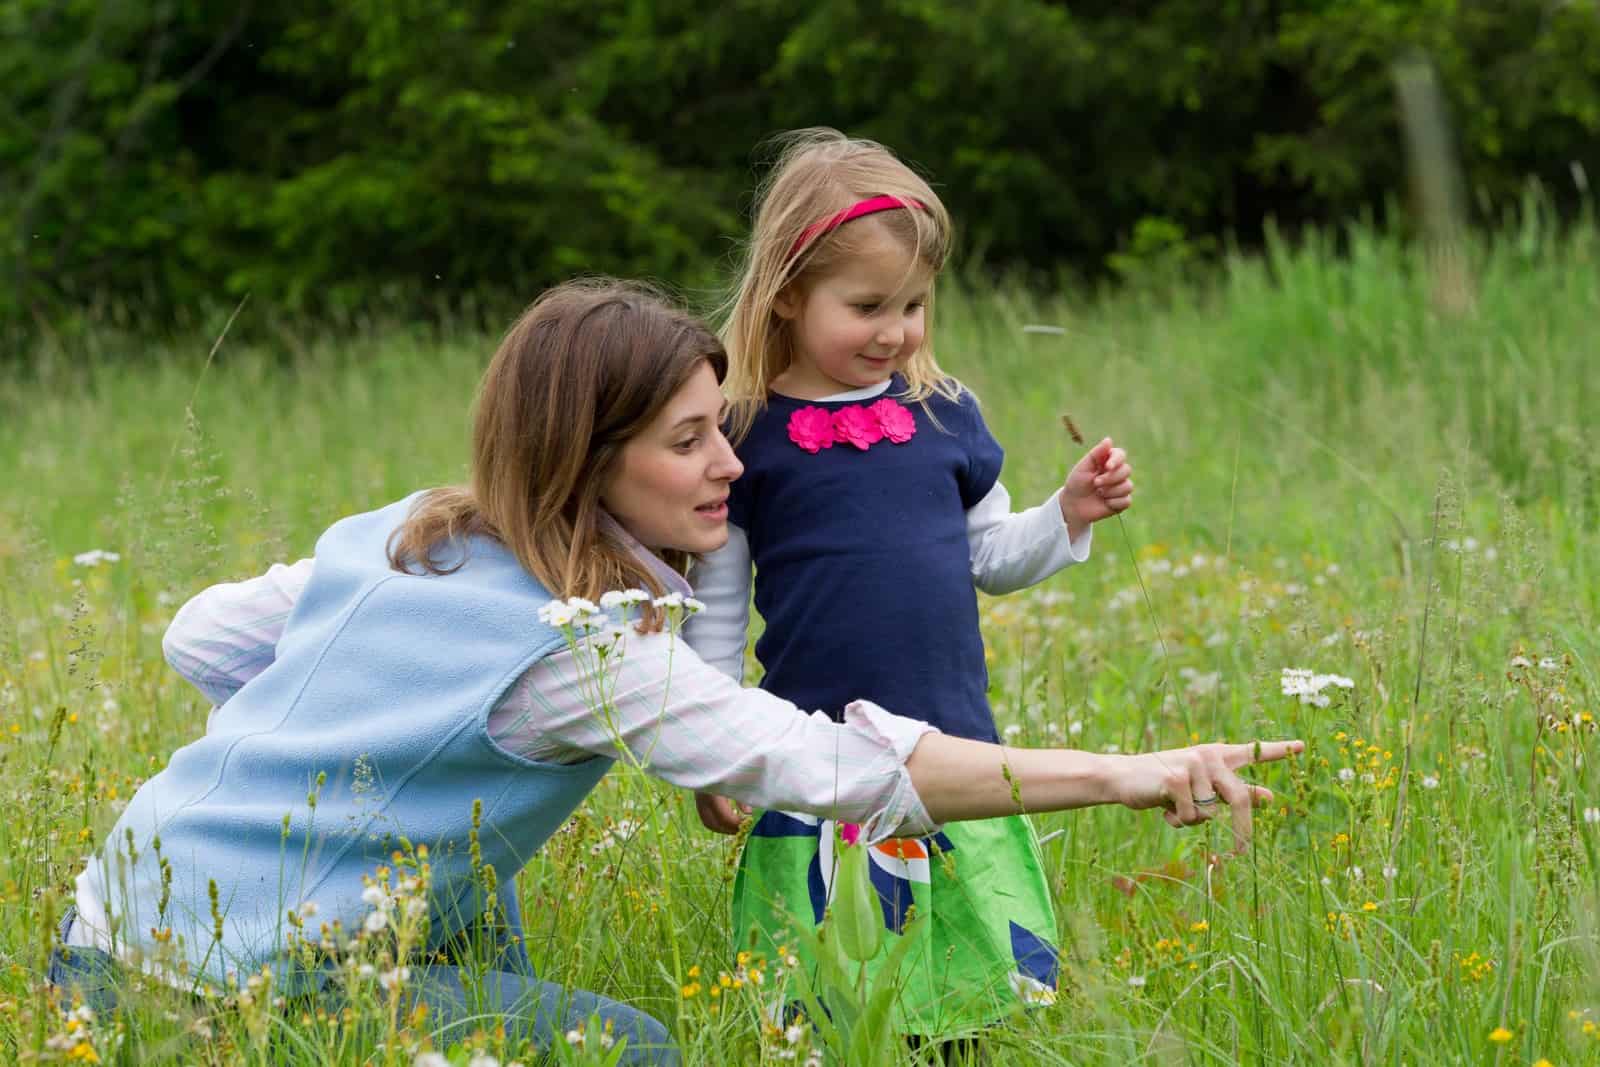 A mother and a young girl stand in a meadow with wildflowers. The mother is pointing to a white bloom and the daughter is looking at it.